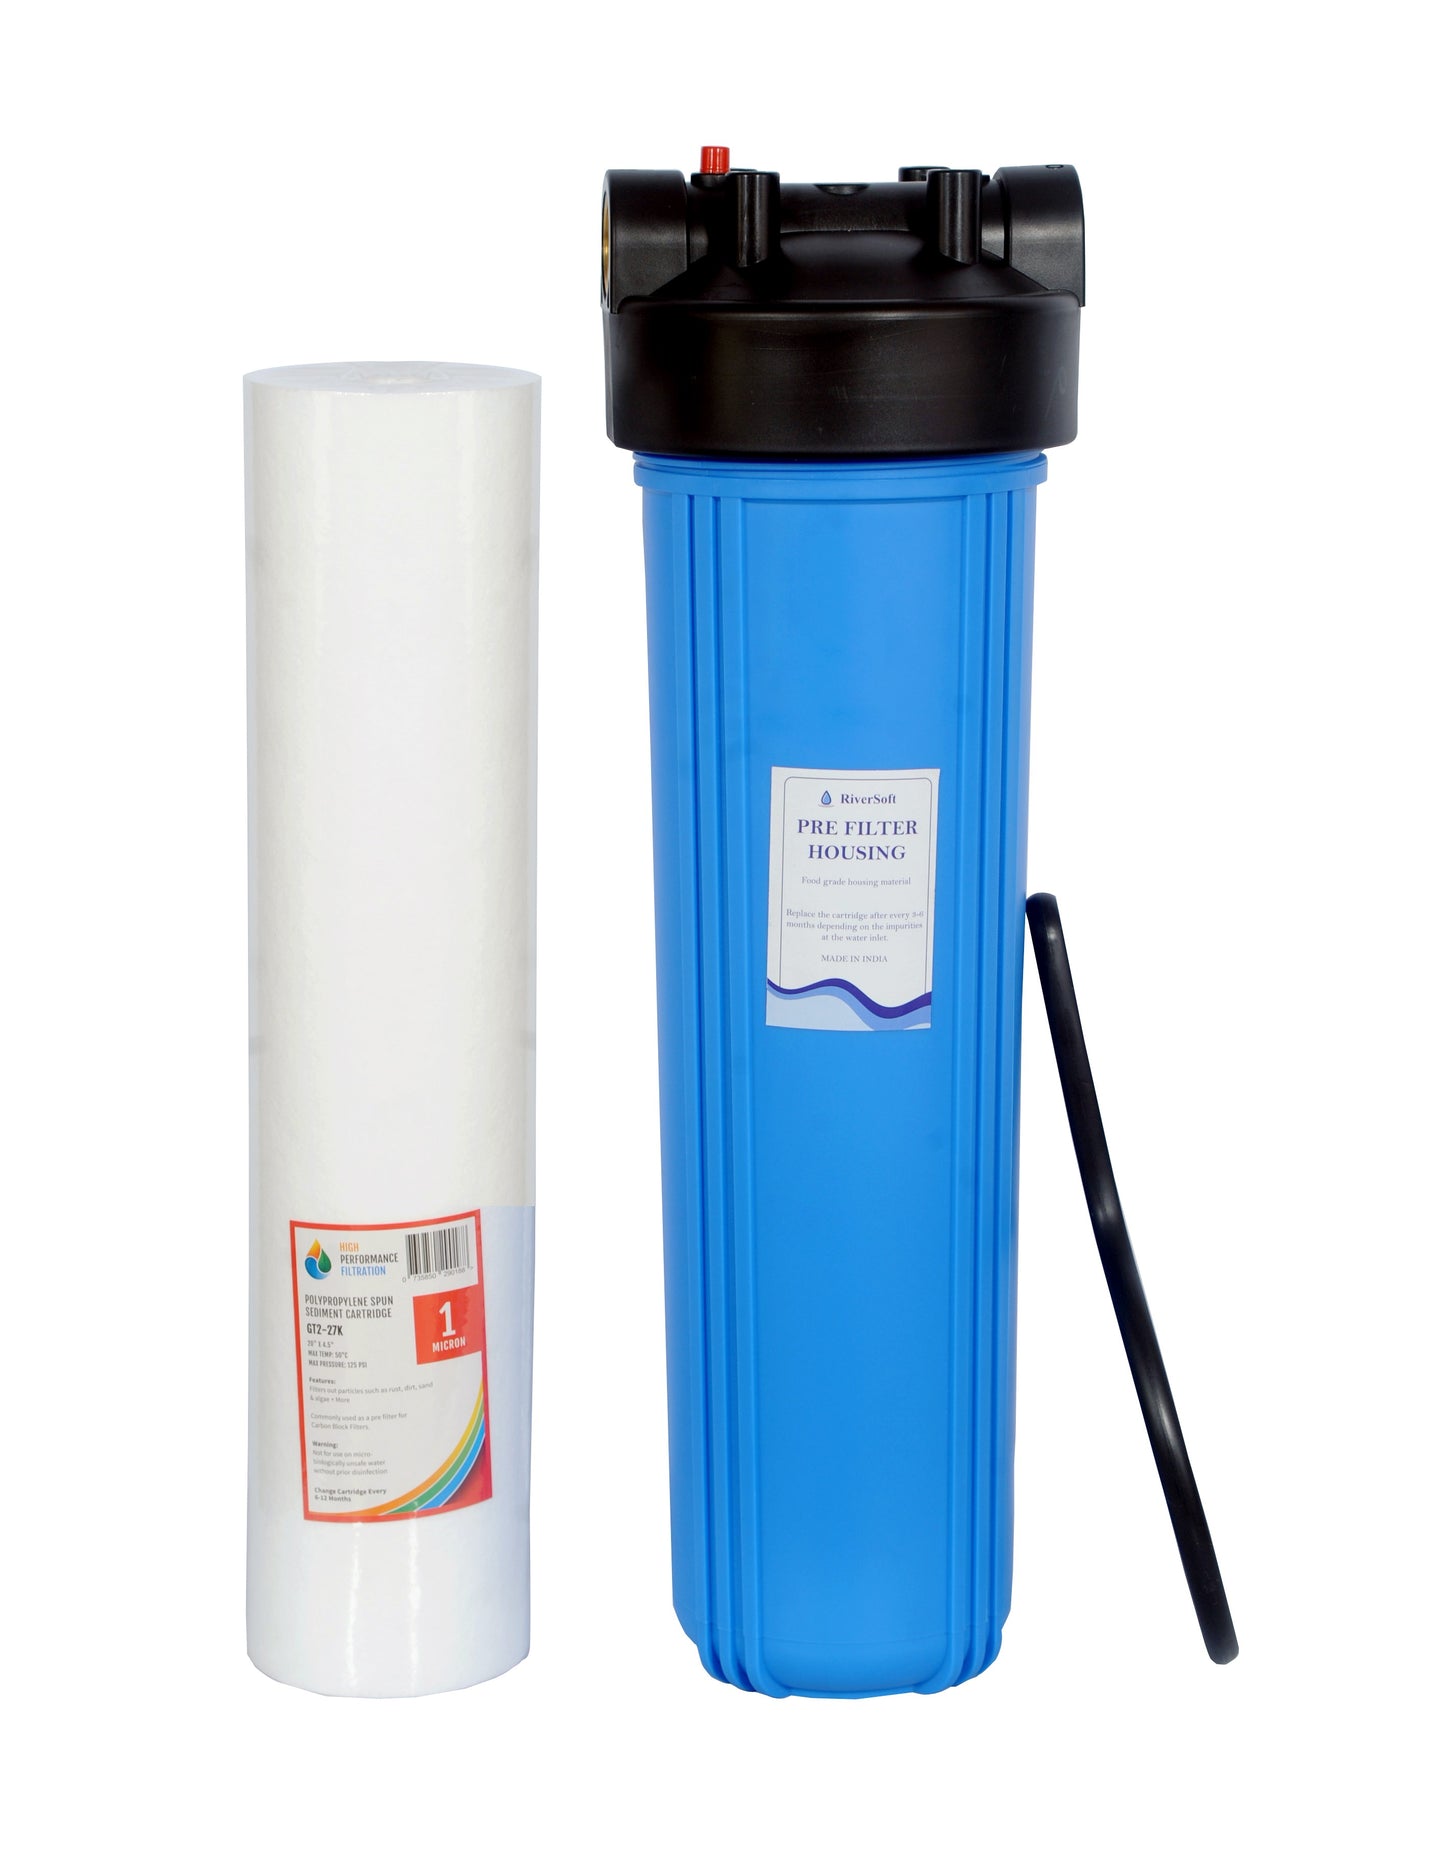 ASP-20 Mainline sediment filter | 20 inch big blue housing with spun cartridge | 1 micron | 1 inch inlet outlet